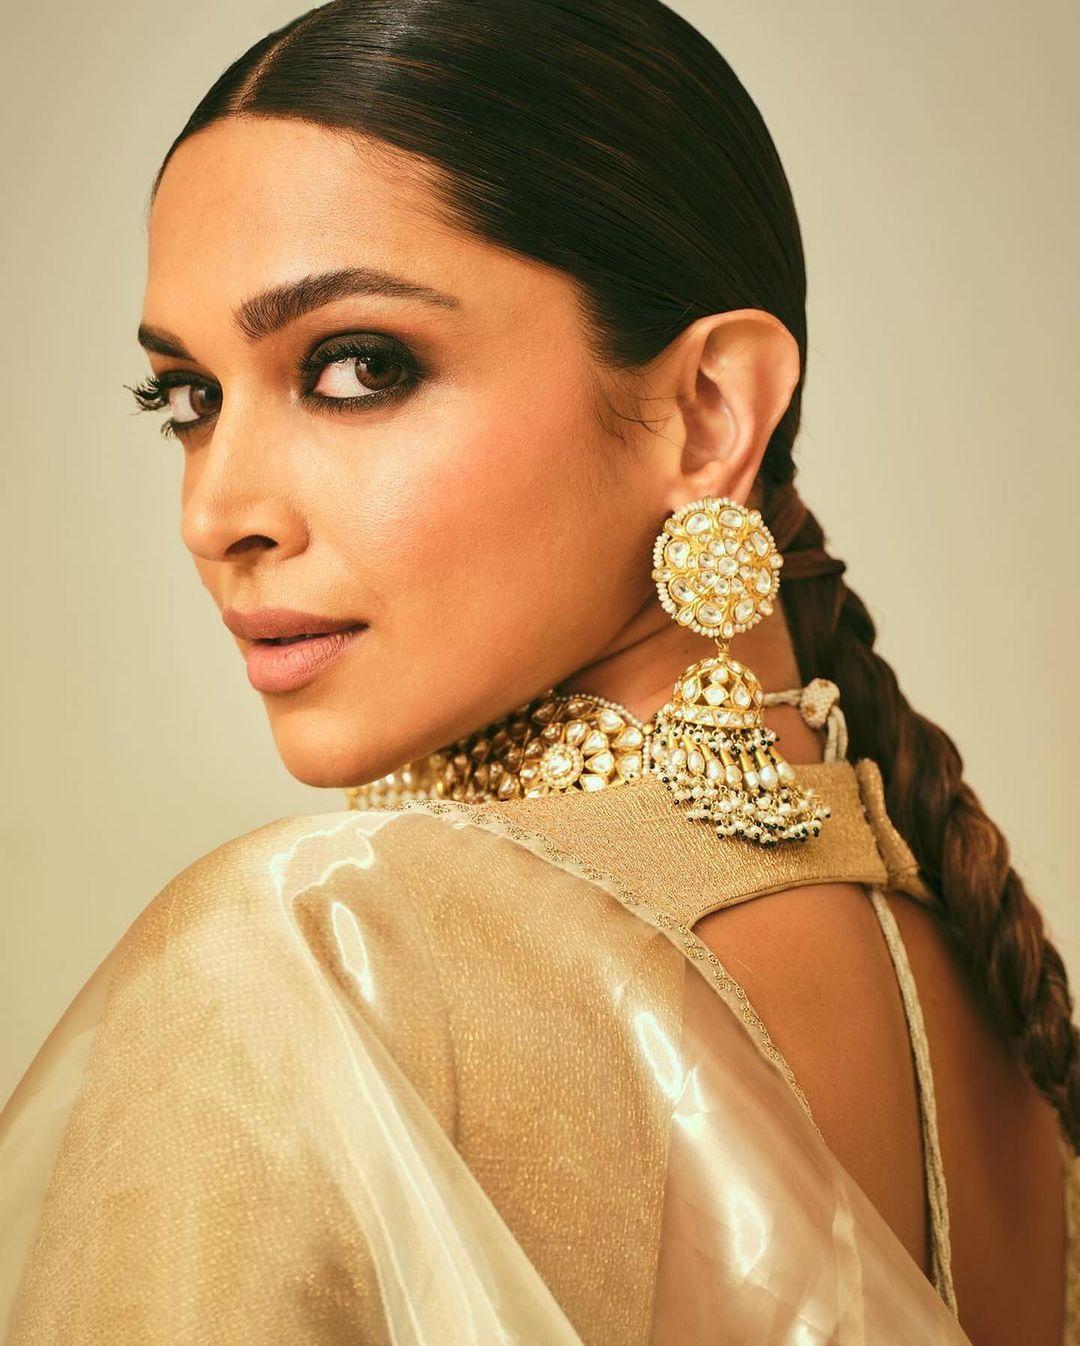 Deepika chose a large motif jhumka (traditional Indian earring) and a choker necklace. Her sleek mid-part hairstyle, styled in neat, low ponytail braids, completed her stunning look.